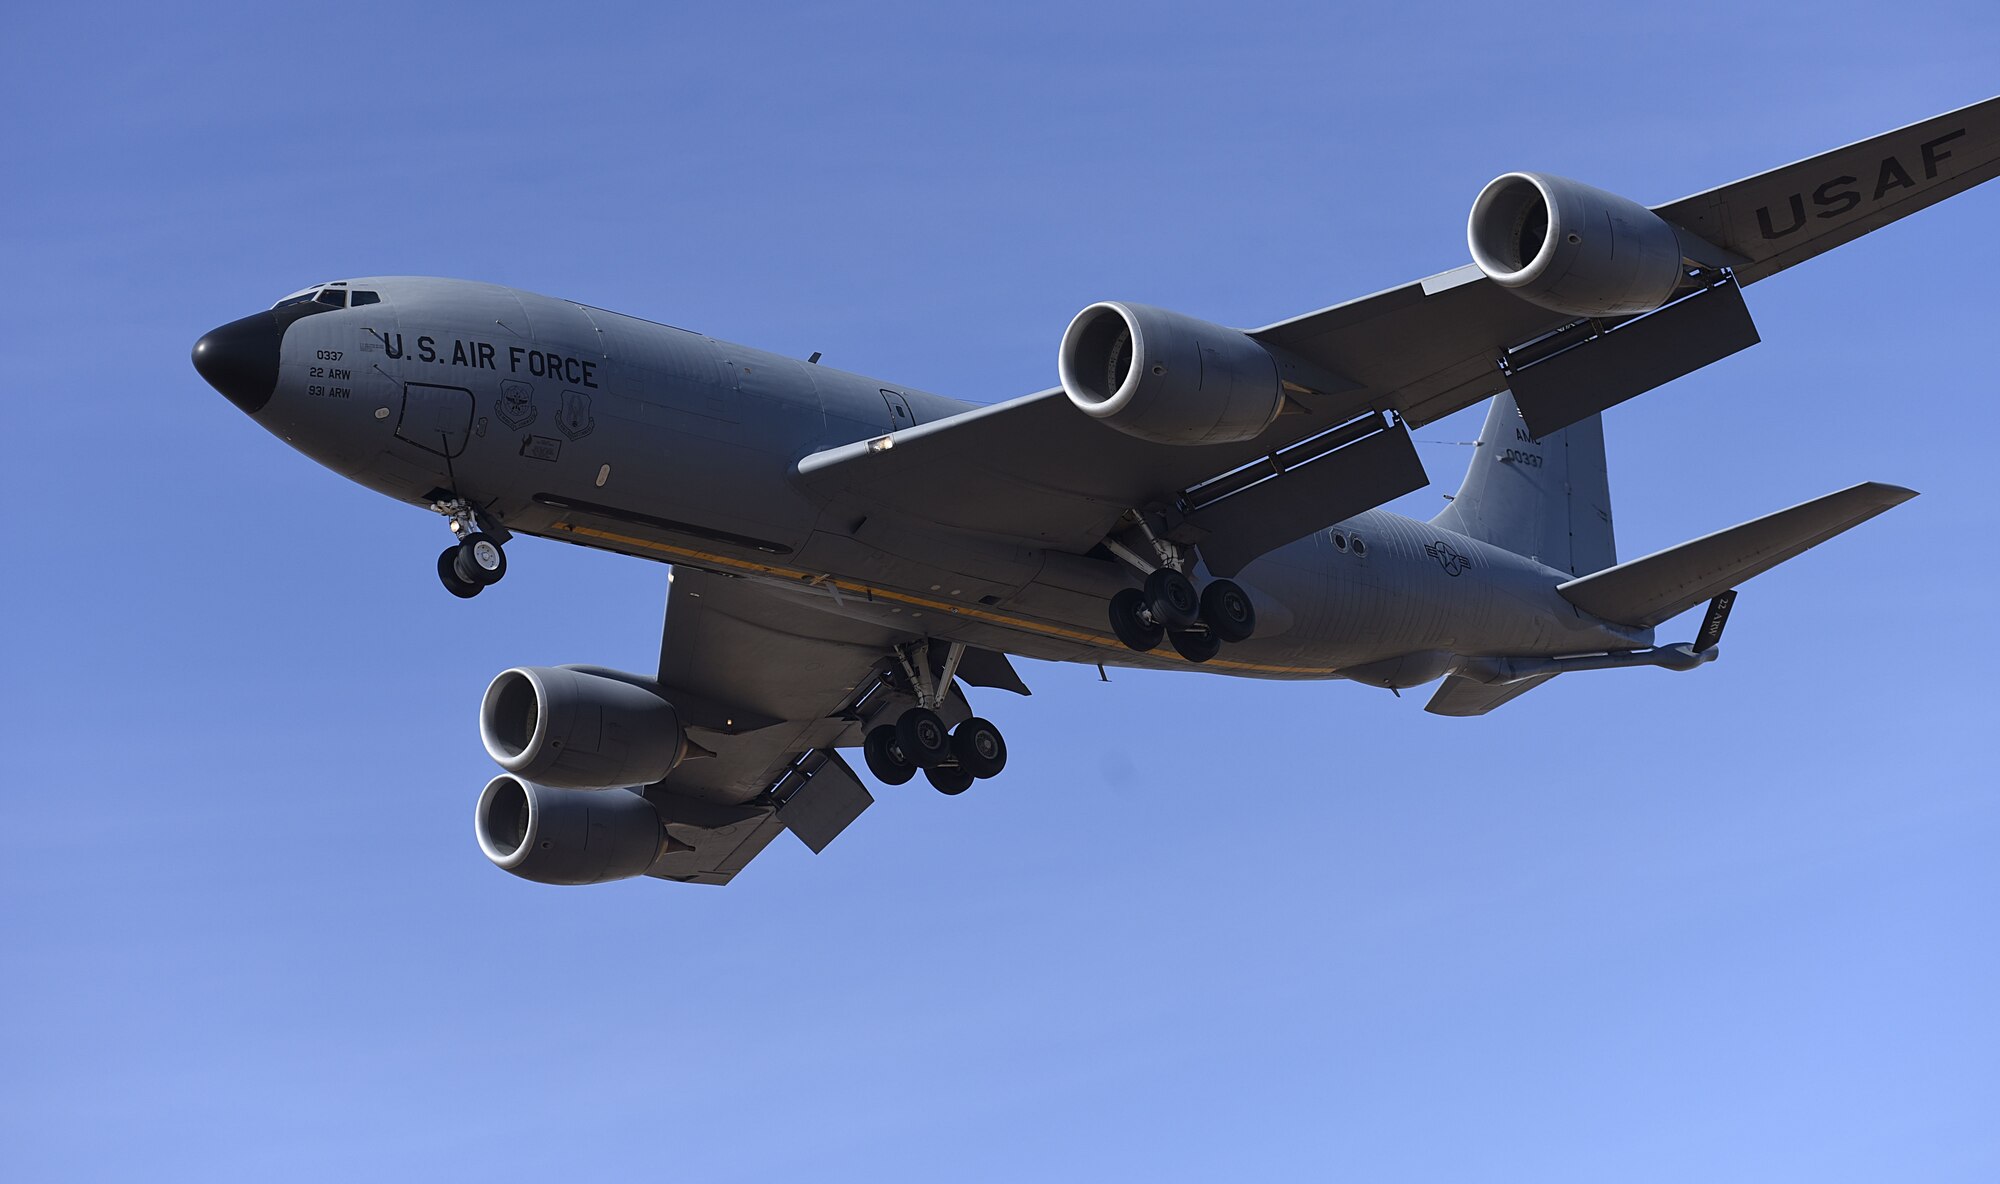 A KC-135 Stratotanker descends before landing at McConnell Air Force Base, Kan., Jan. 18, 2018. Air Mobility Command’s tanker fleet, which is primarily made up of KC-135s, offloaded 1.18 billion pounds of fuel to U.S. and allied aircraft in 2017. (U.S. Air Force photo by Airman 1st Class Erin McClellan)